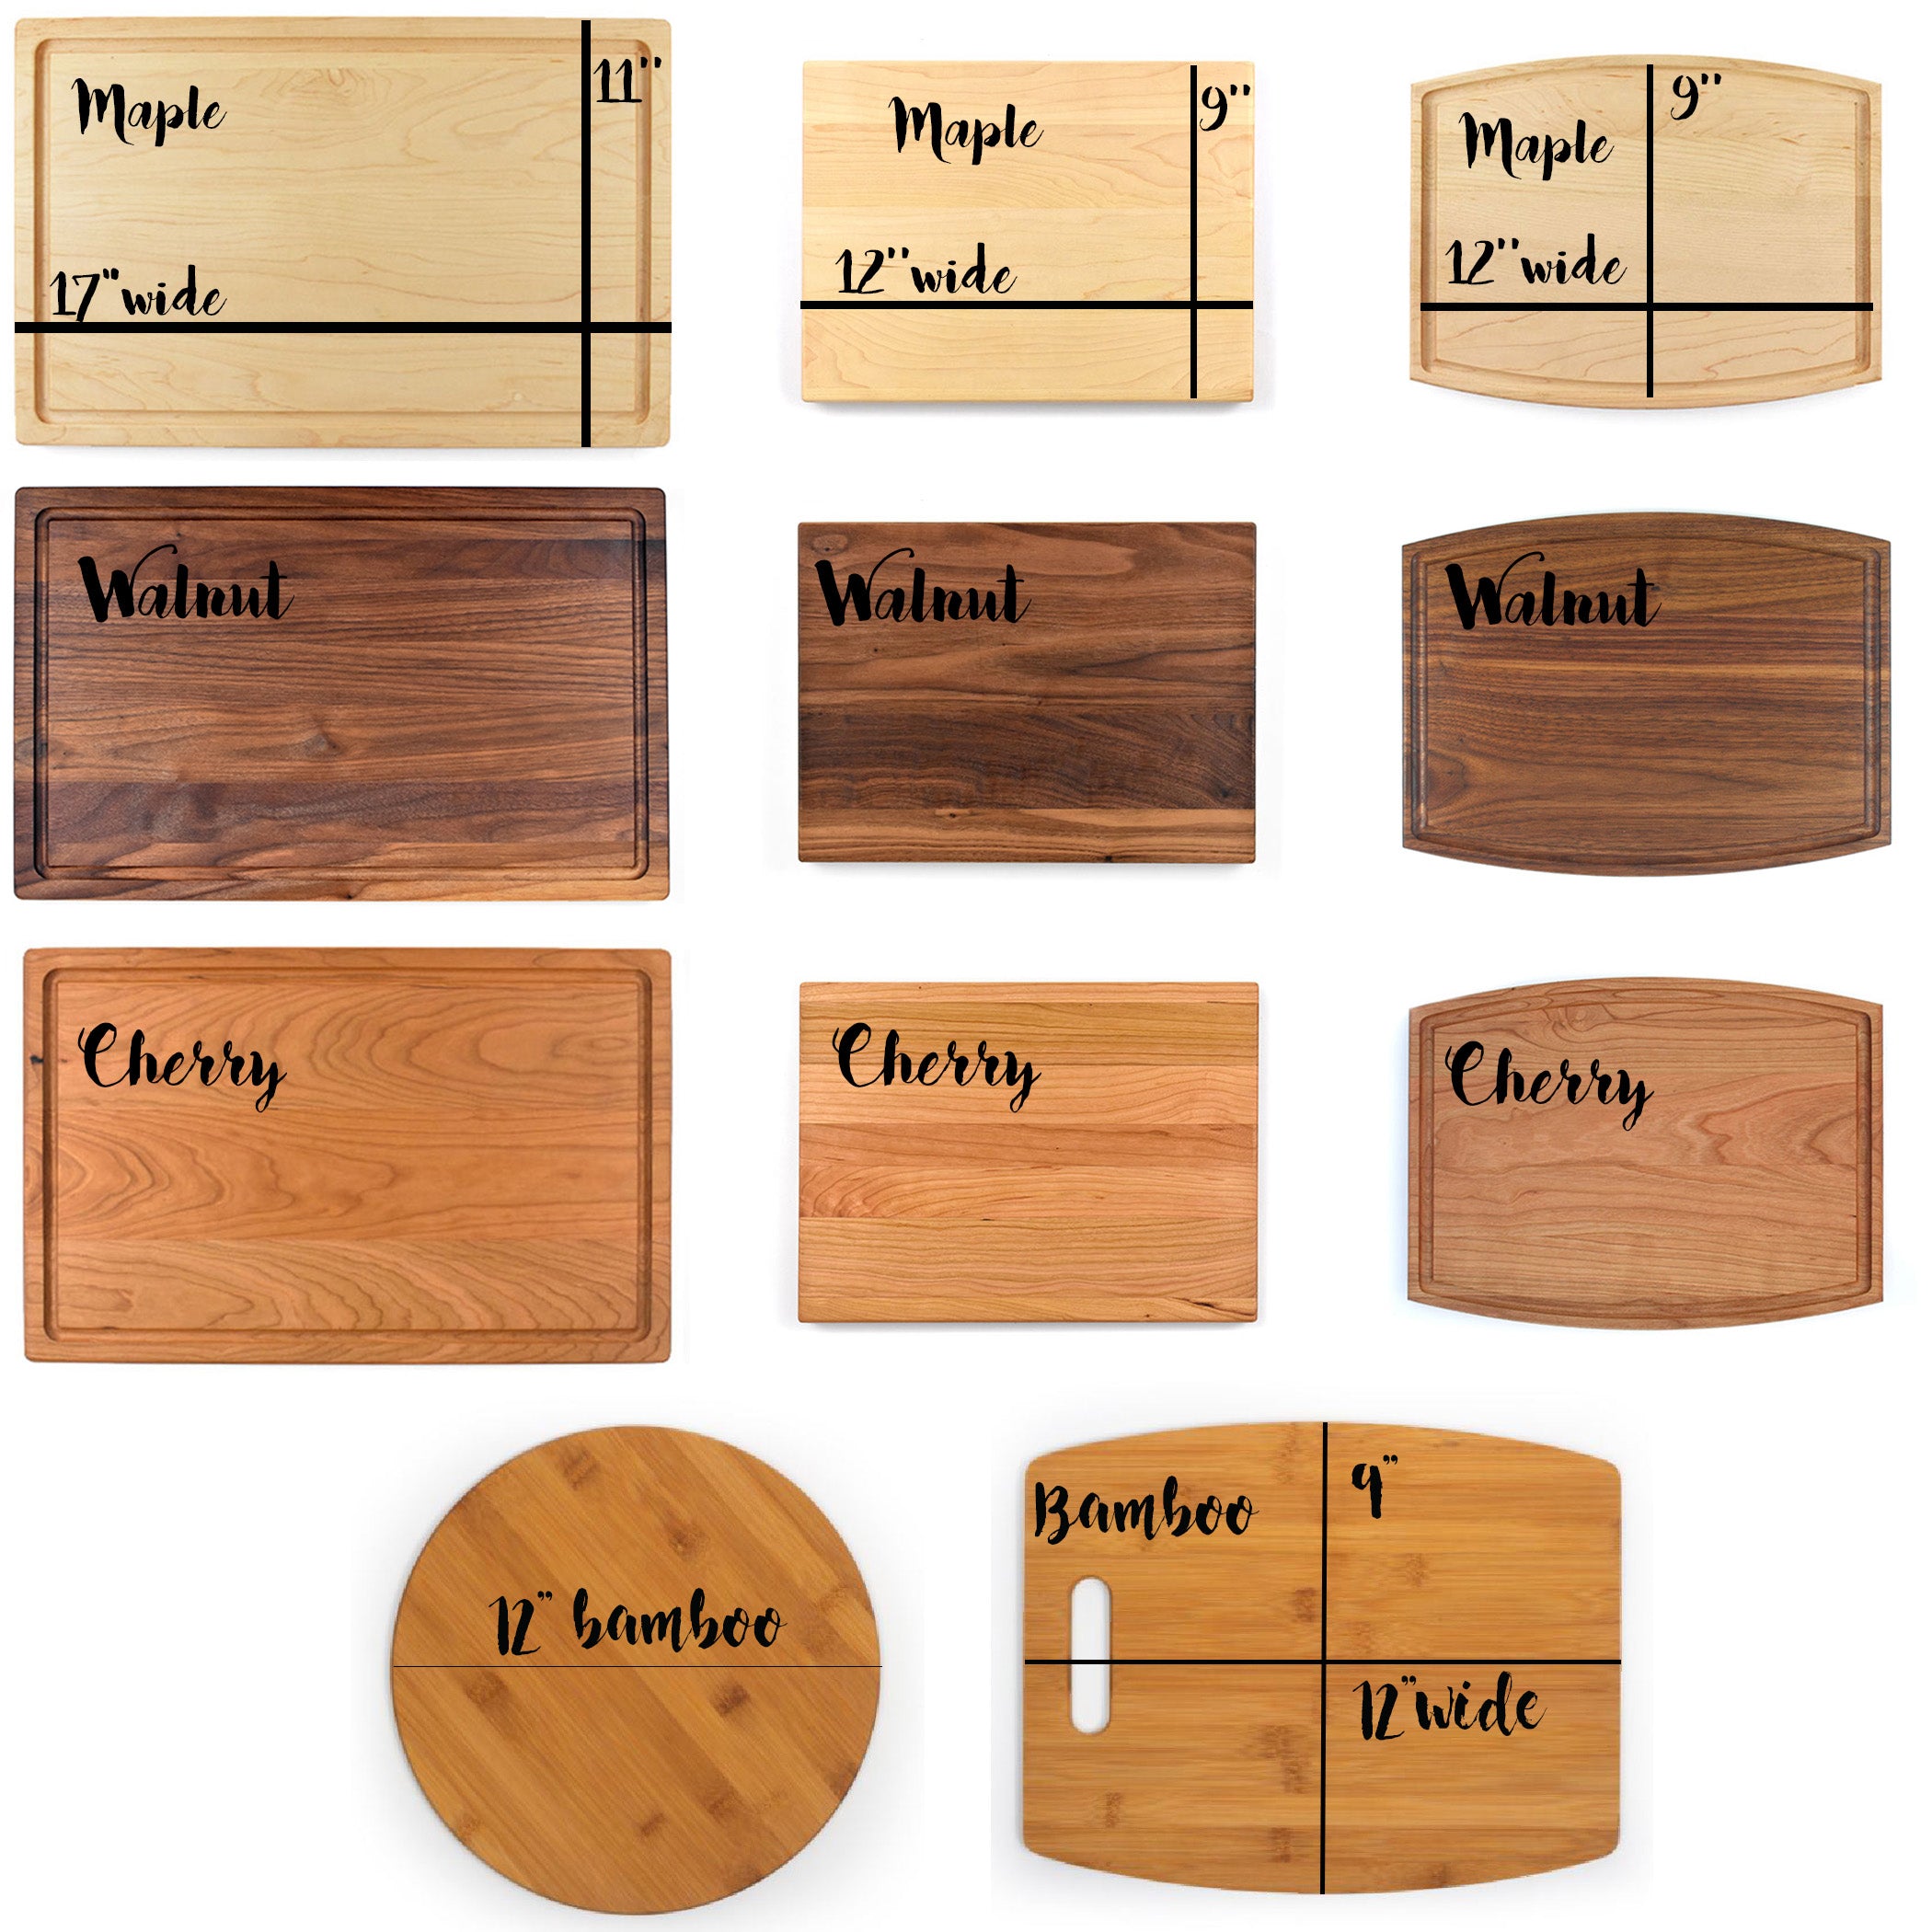 5 Best Wood For Cutting Boards 2020 